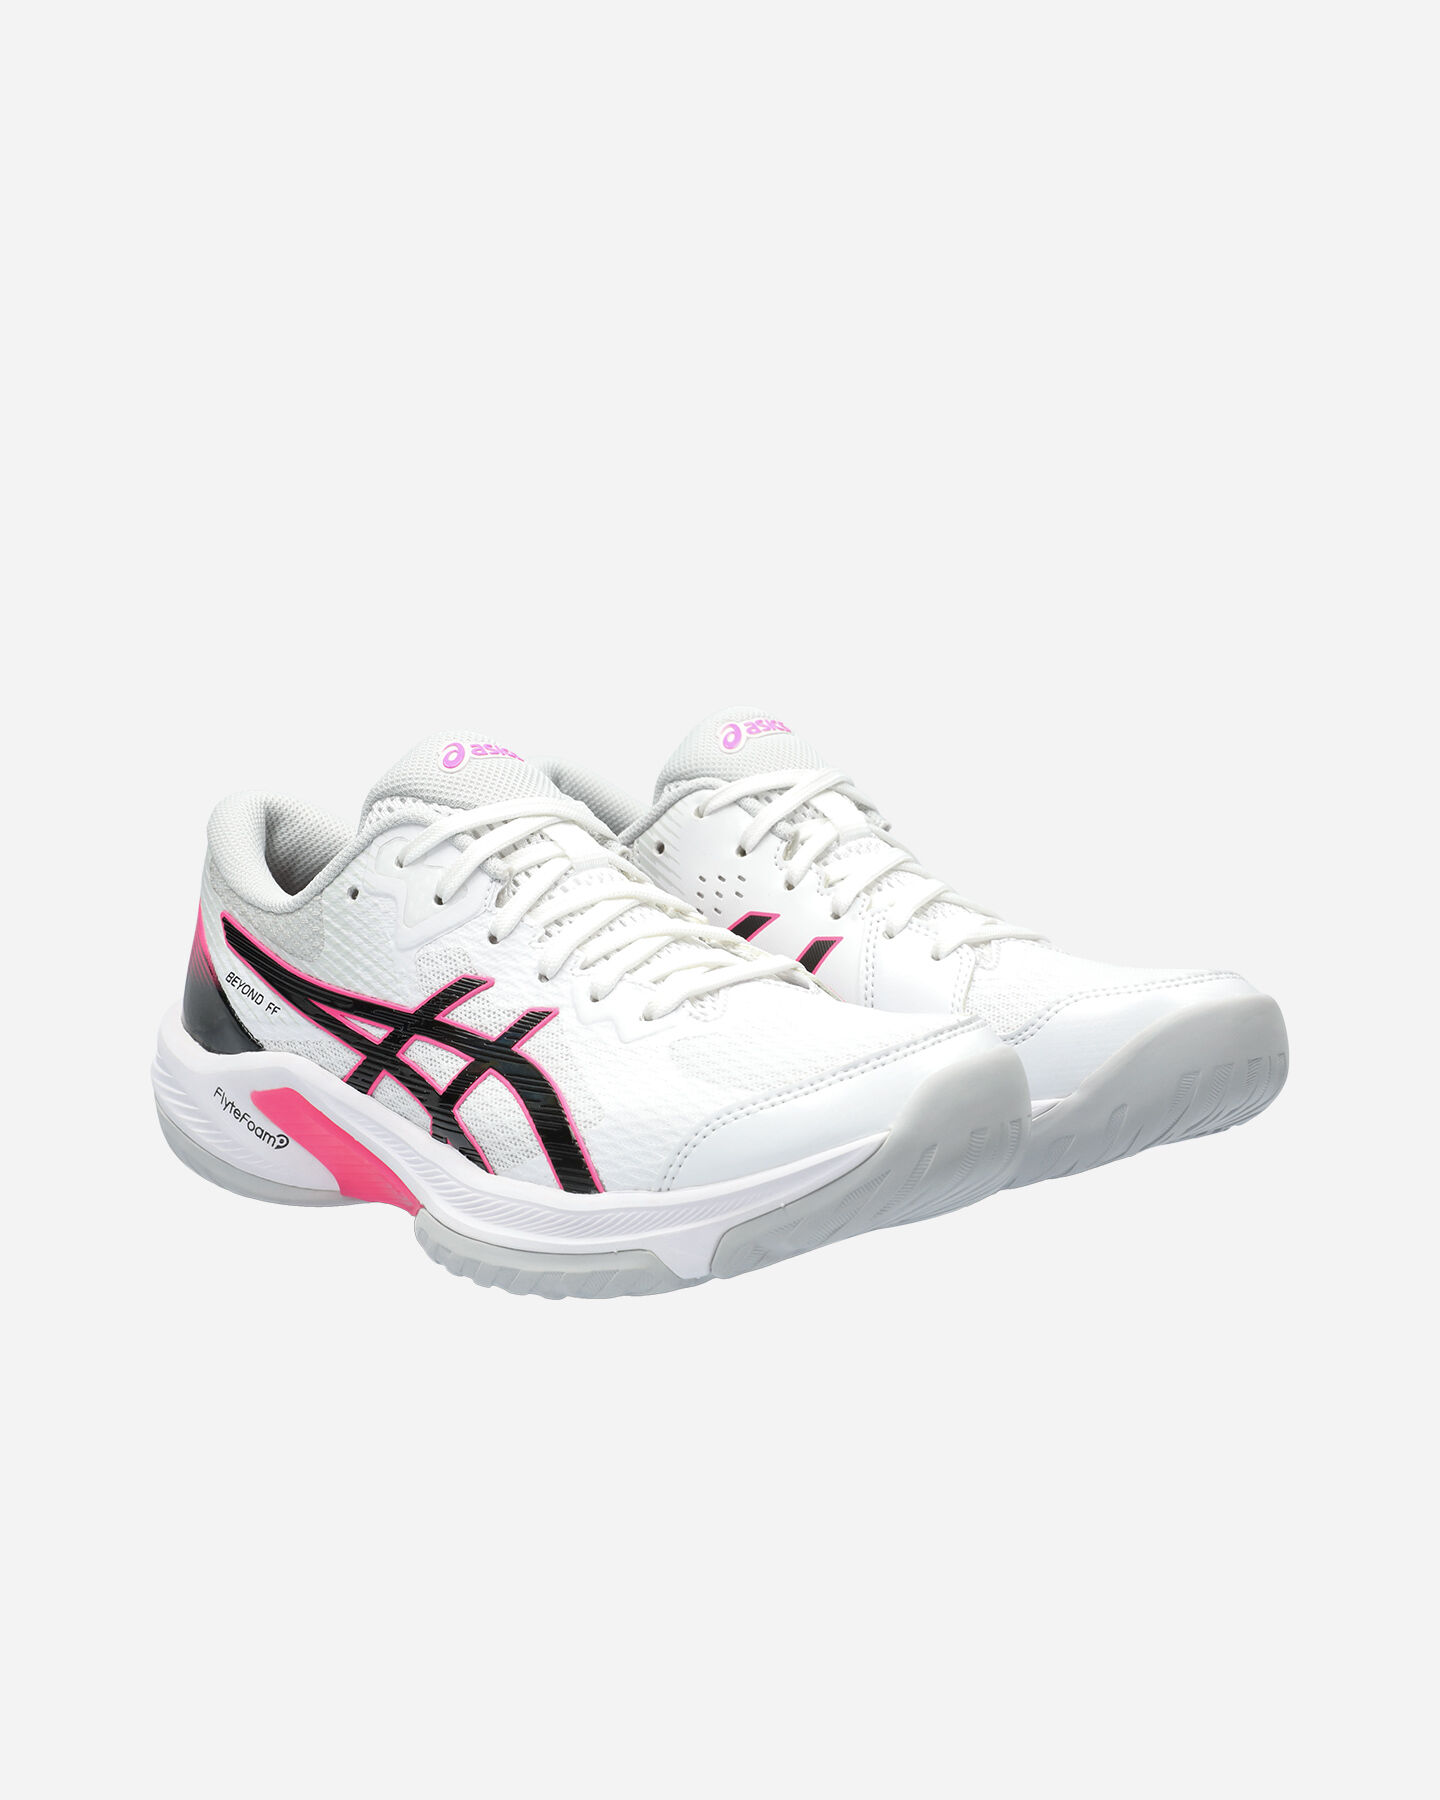  Scarpe volley ASICS BEYOND W S5585397|101|8 scatto 1